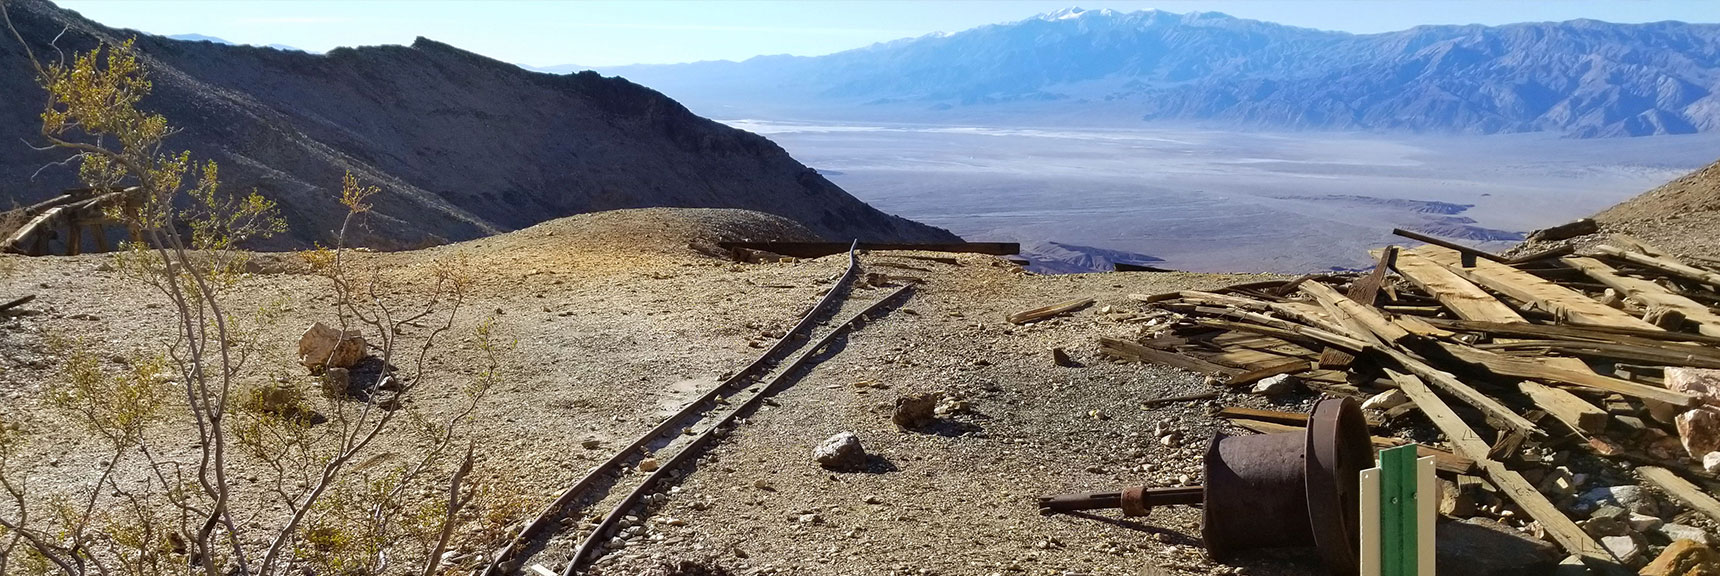 Ore Cart Tracks Protruding from Mine | Keane Wonder Mine | Death Valley National Park, California